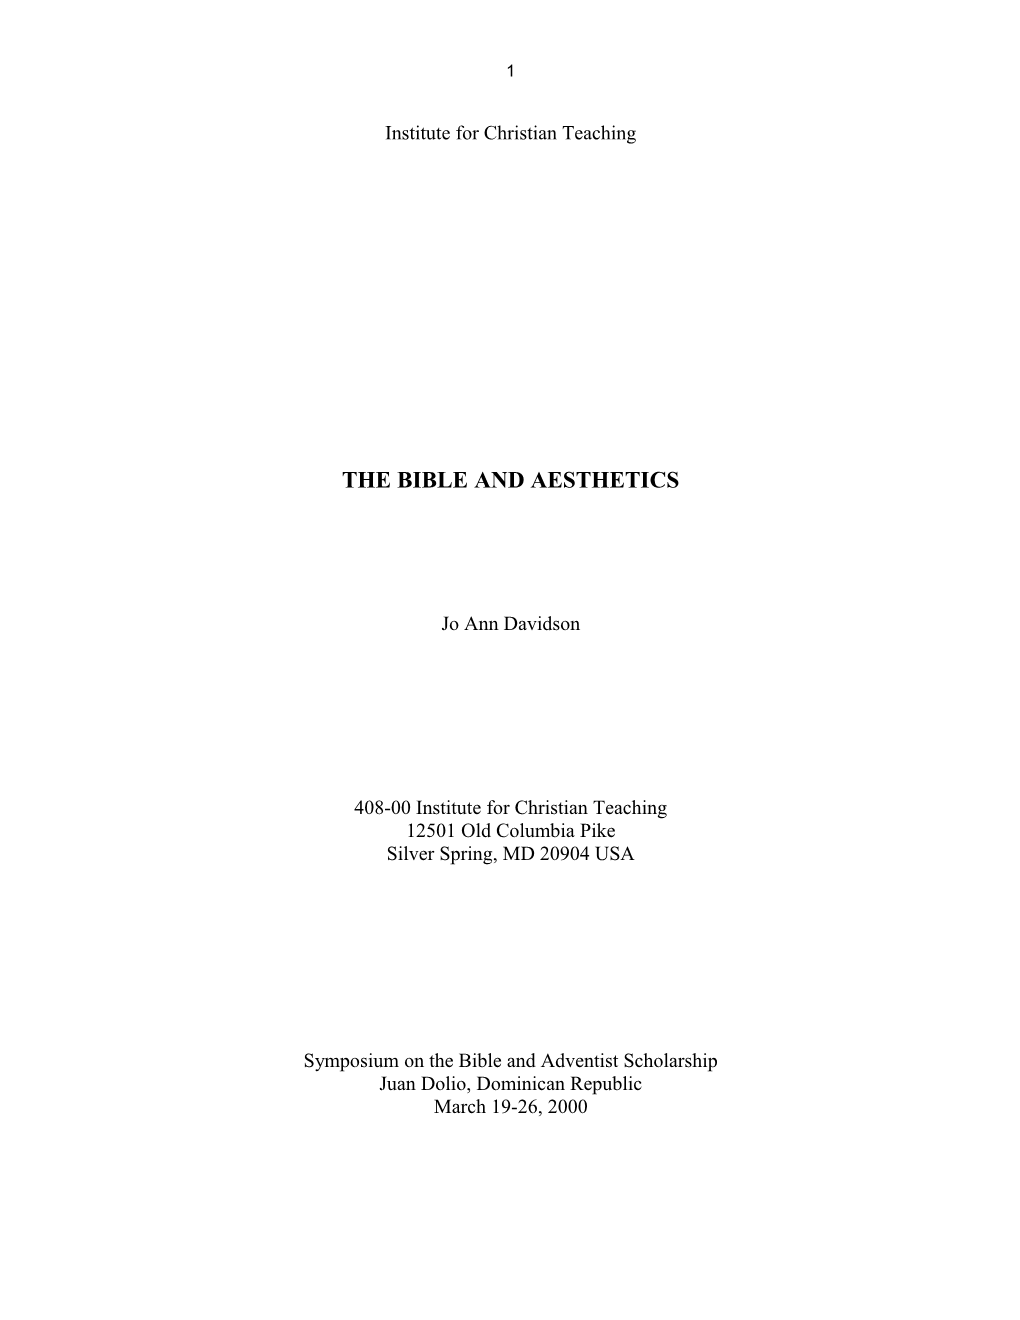 The Bible and Aesthetics